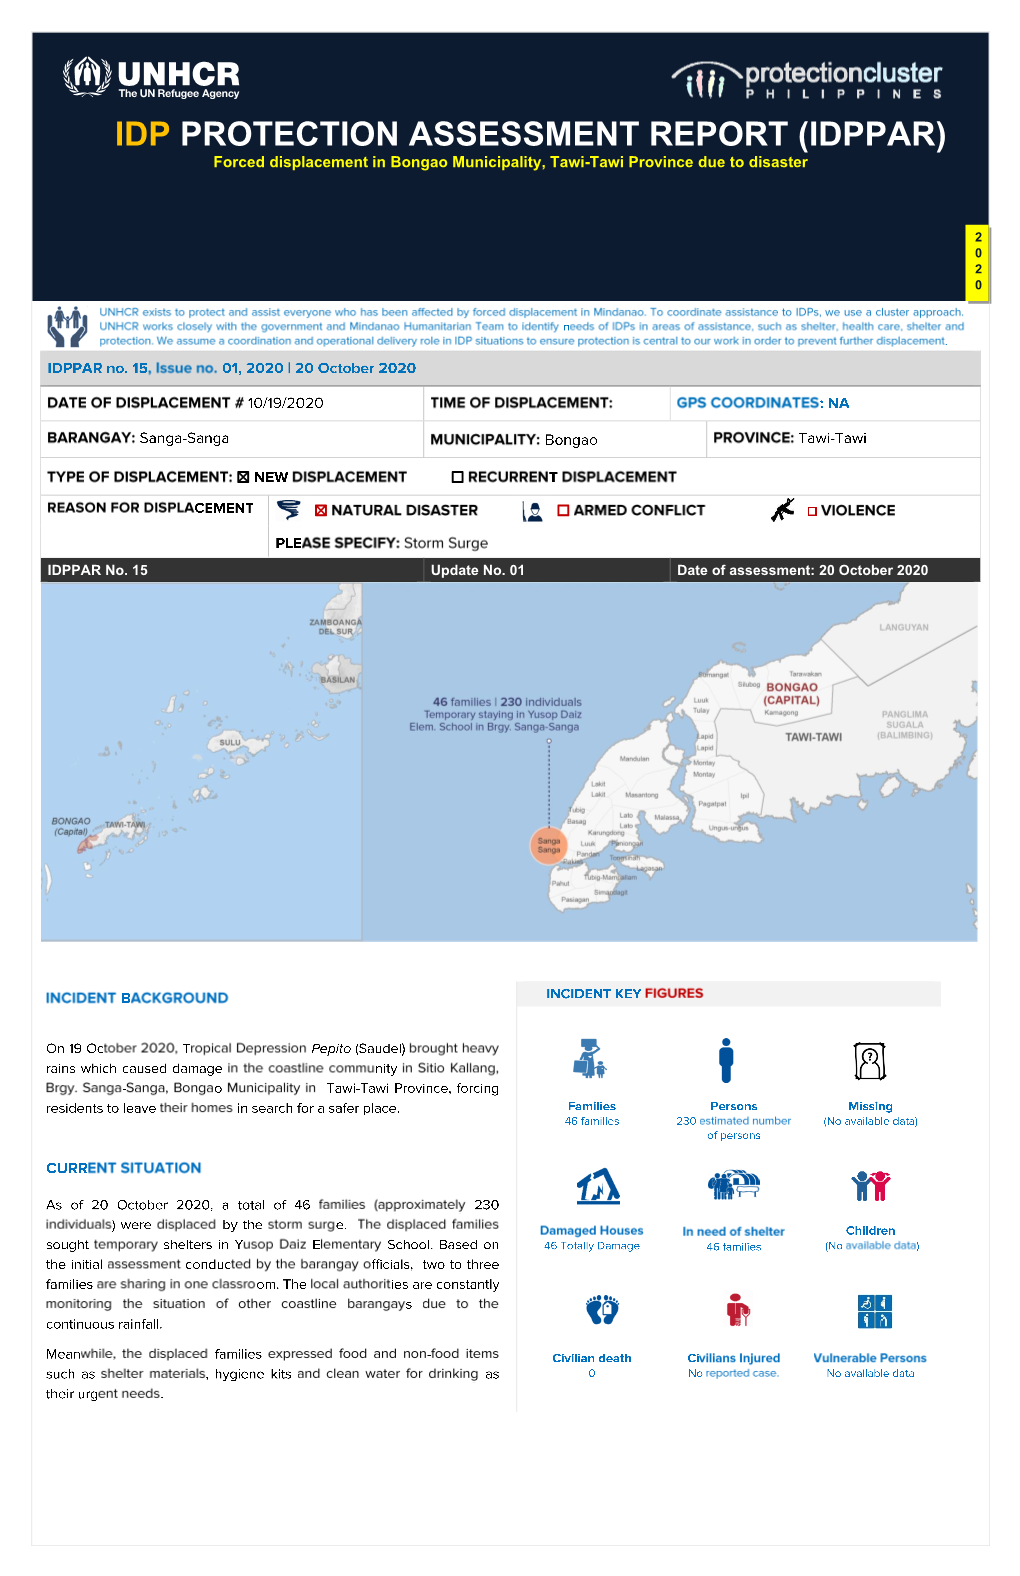 IDP PROTECTION ASSESSMENT REPORT (IDPPAR) Forced Displacement in Bongao Municipality, Tawi-Tawi Province Due to Disaster